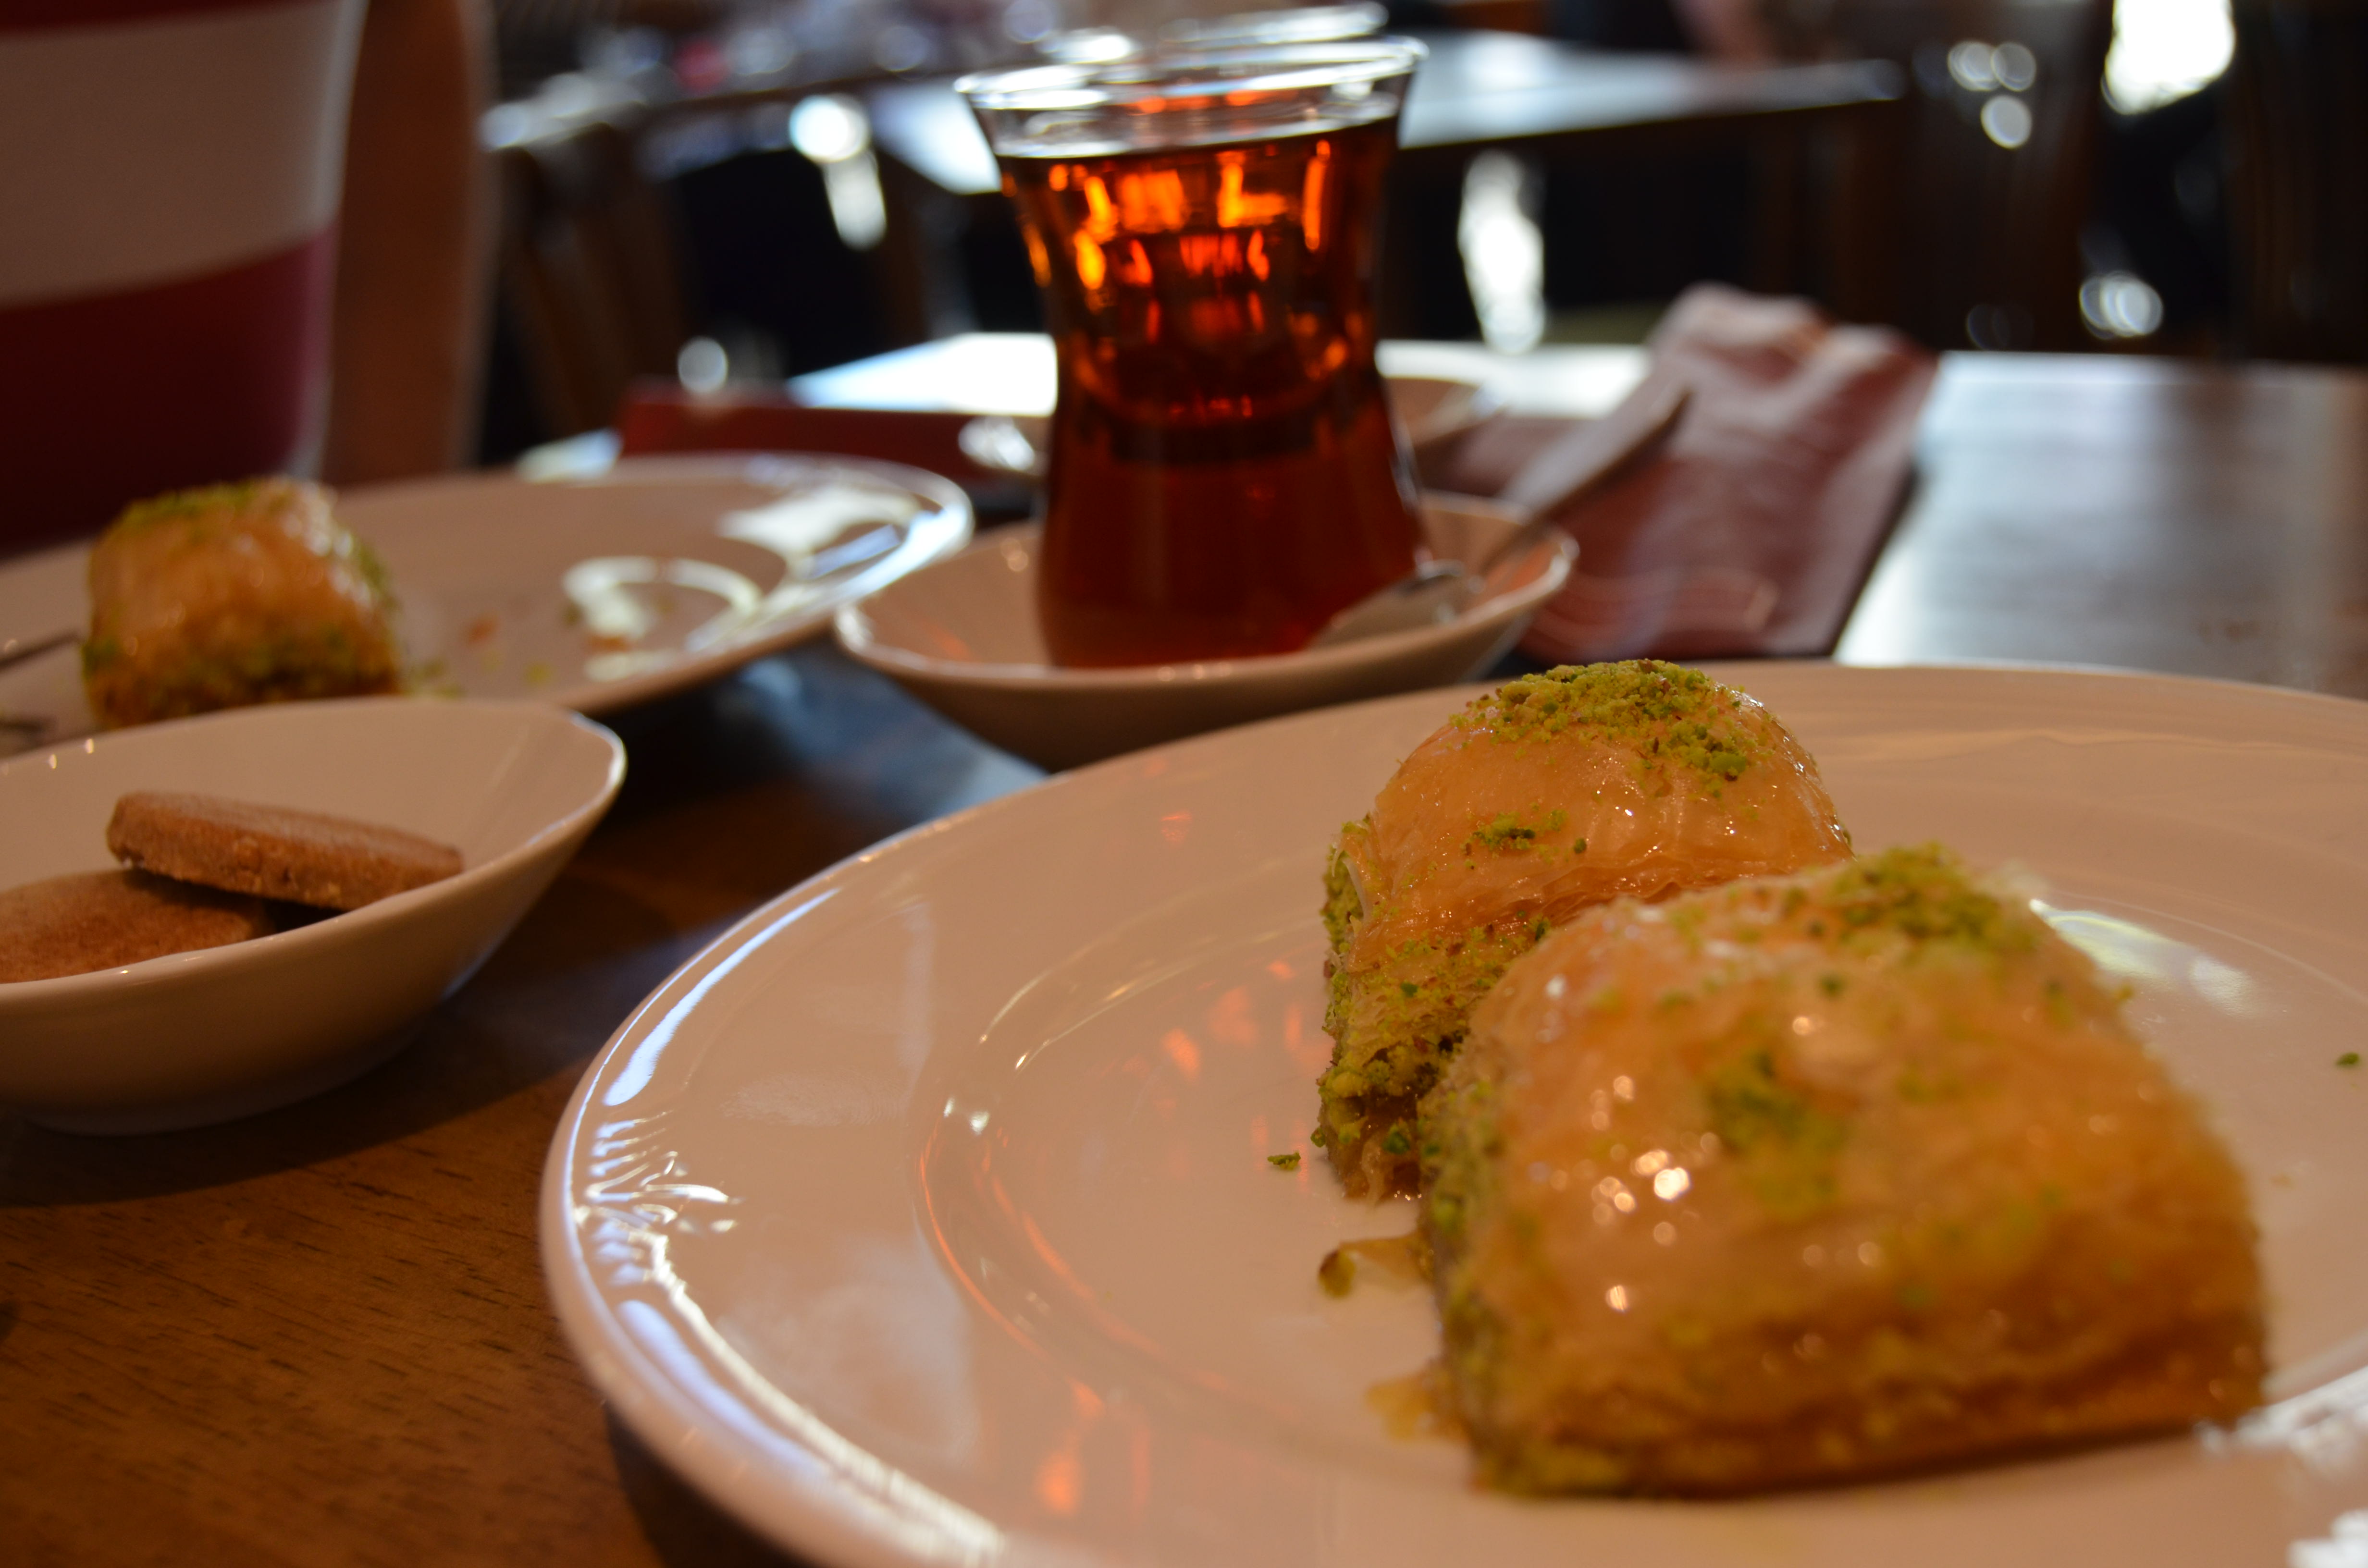 Turkish tea and the one and only baklava!